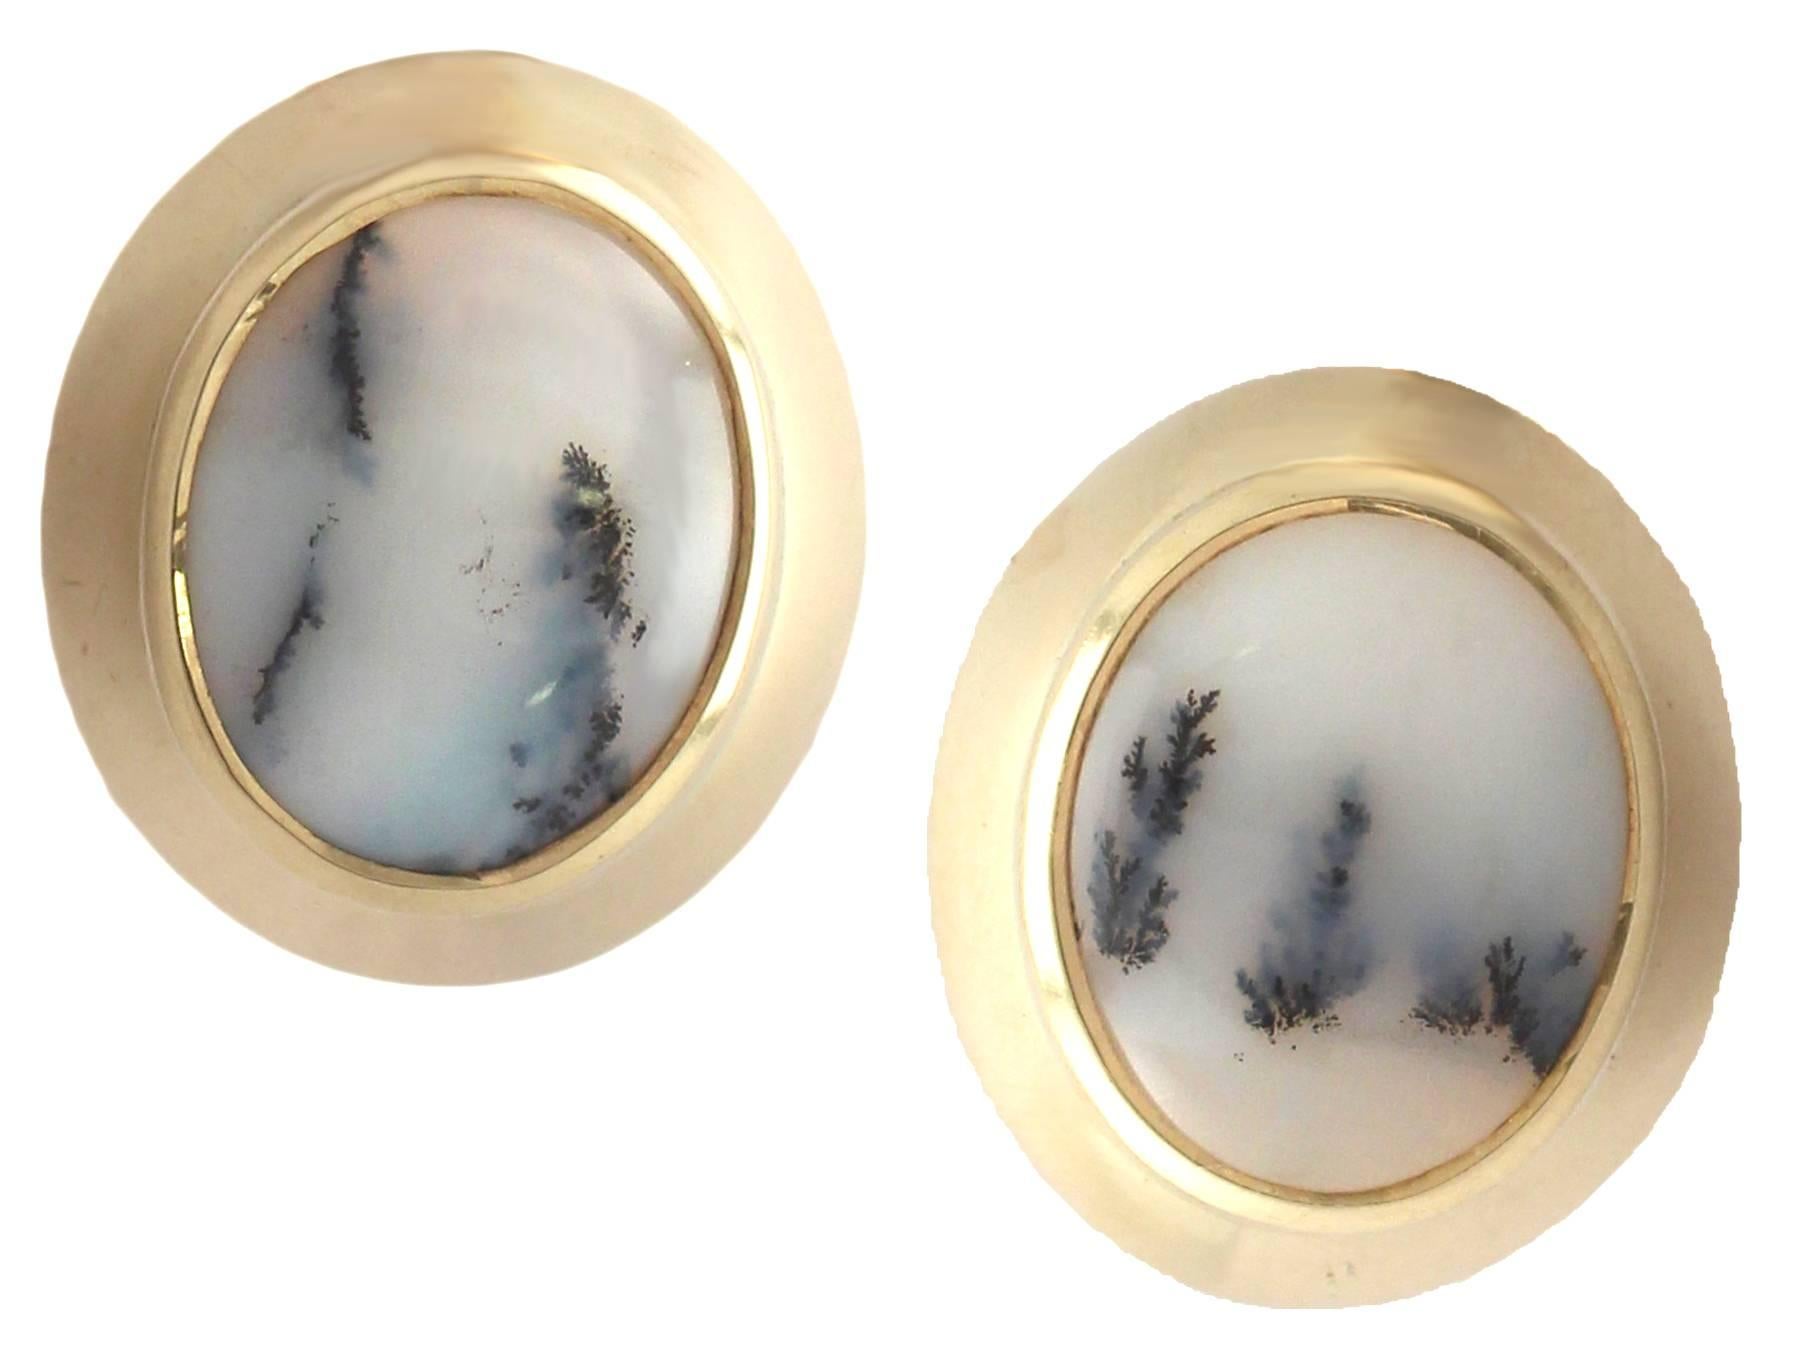 A fine and impressive pair of vintage moss agate and 18 karat yellow gold cufflinks; an addition our diverse vintage jewelry and estate jewelry collections

This fine and impressive pair of agate cufflinks has been crafted in 18k yellow